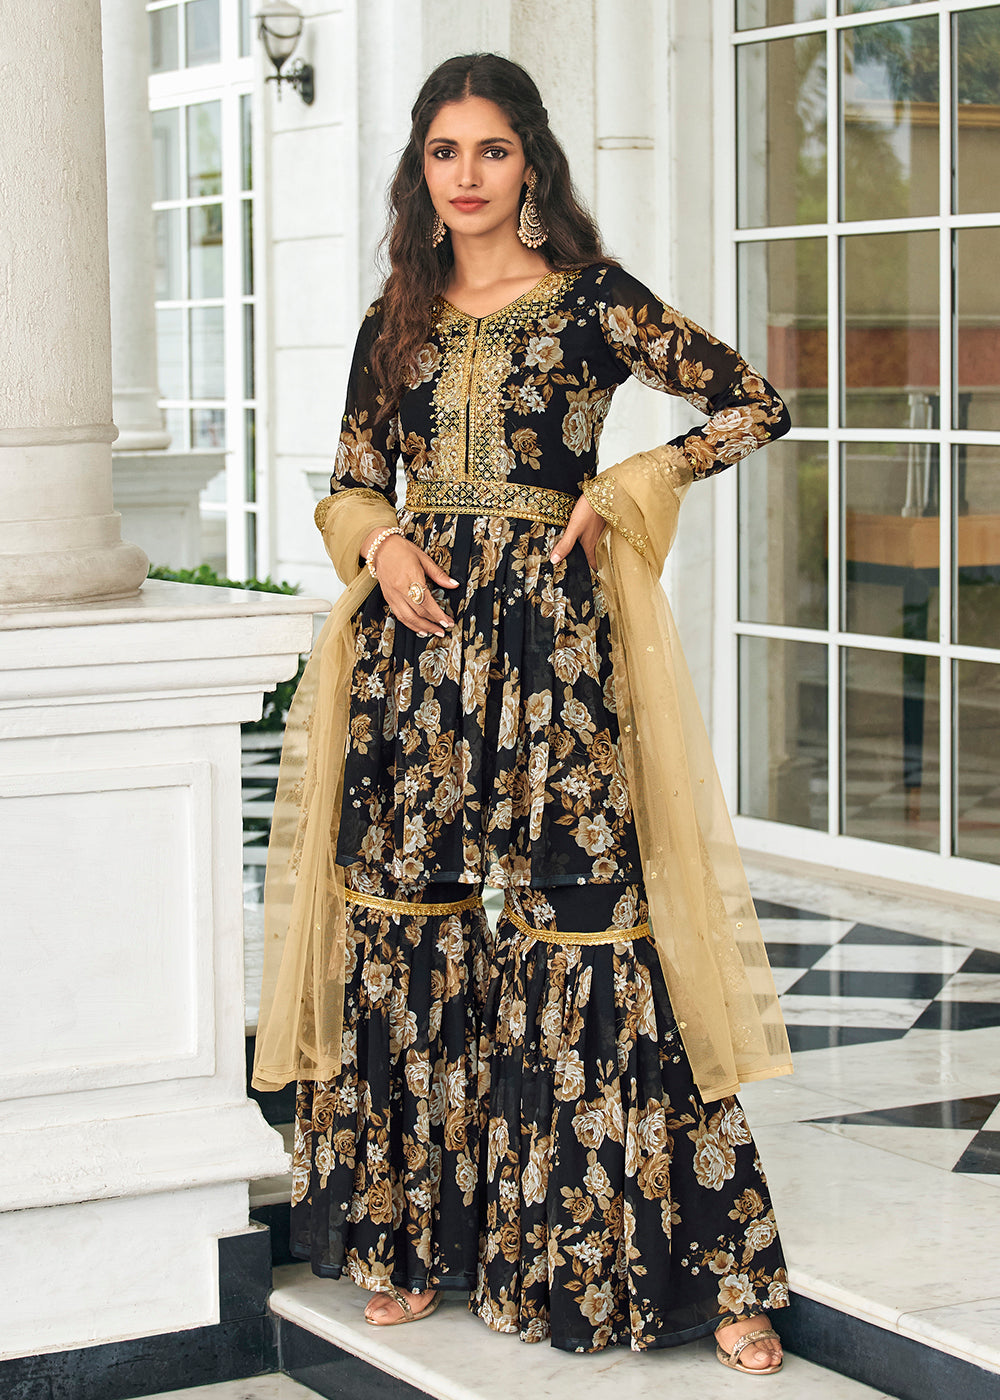 Shop Now Floral Printed Royal Black Trendy Sharara Suit for Wedding Online at Empress Clothing in USA, UK, Canada & Worldwide.